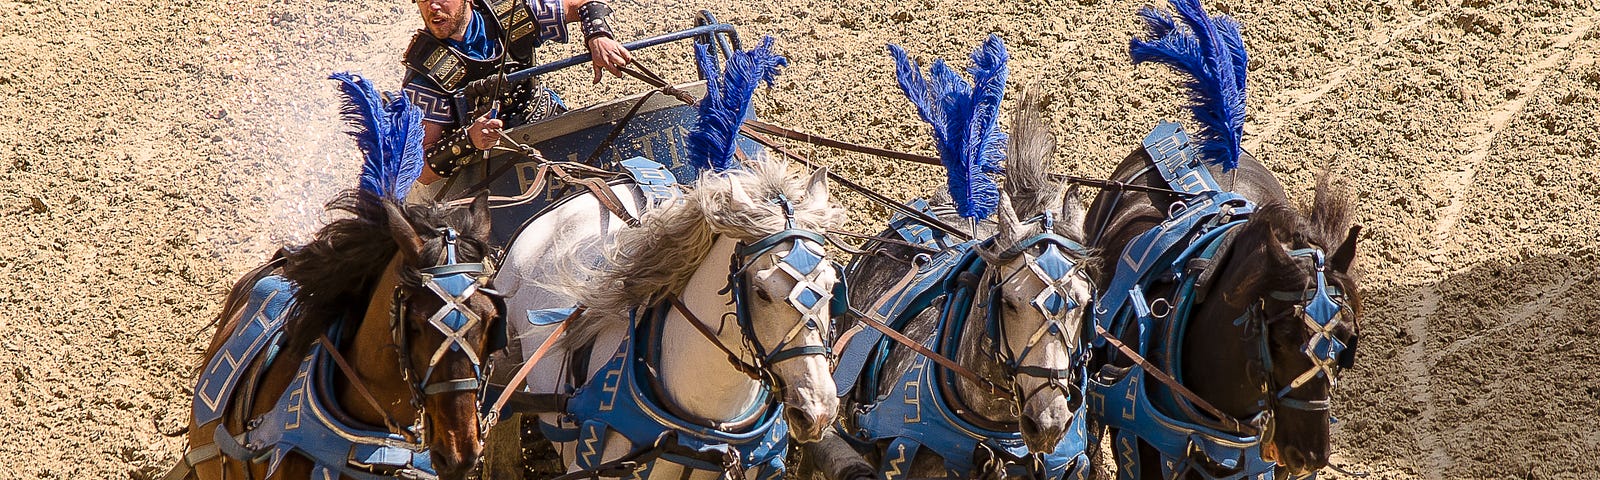 Photo of a young man in an Ancient Roman costume riding a chariot pulled by four horses. Both the horses and the driver are wearing blue feathers.